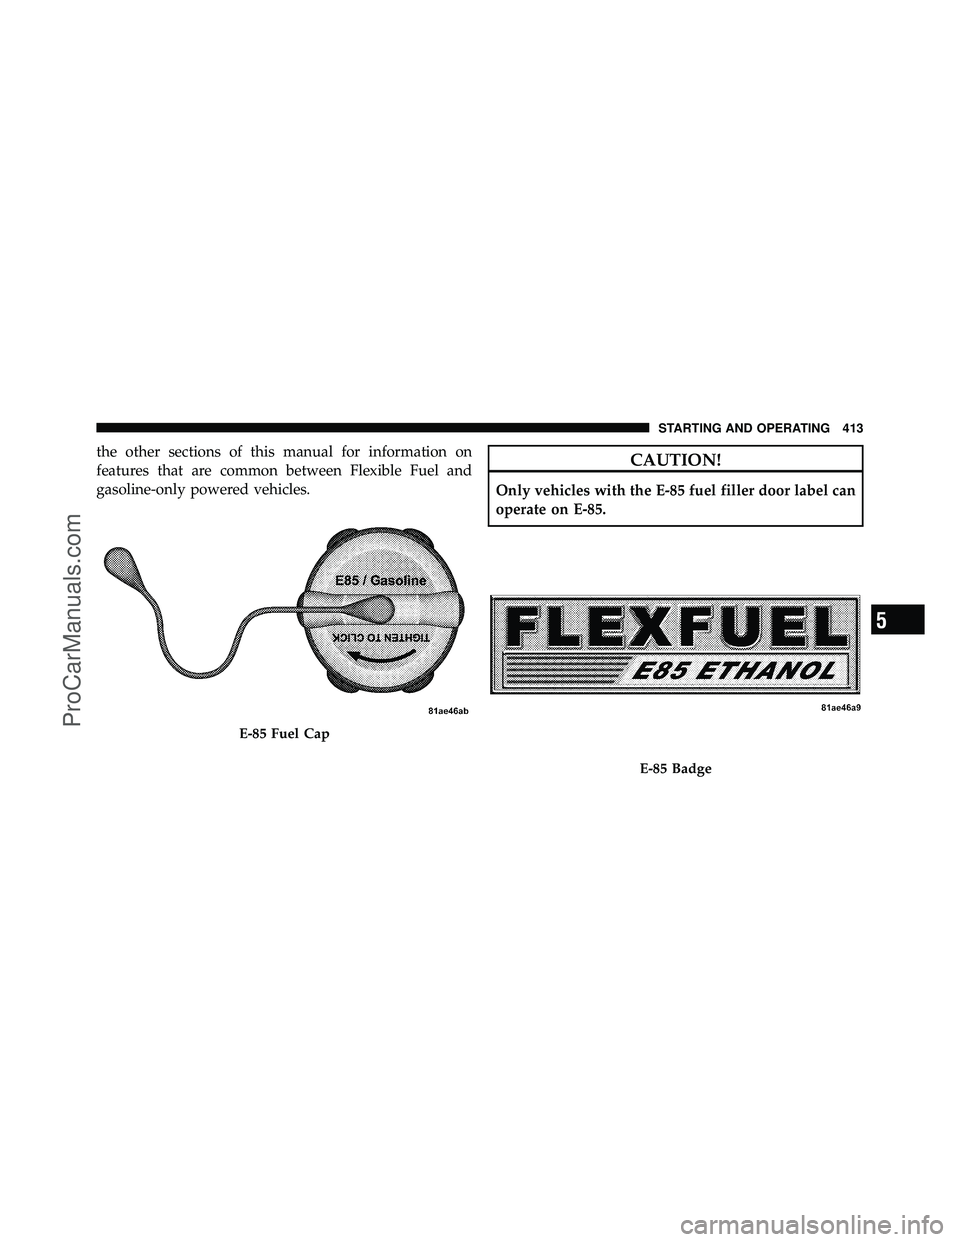 DODGE CARAVAN 2011  Owners Manual the other sections of this manual for information on
features that are common between Flexible Fuel and
gasoline-only powered vehicles.CAUTION!
Only vehicles with the E-85 fuel filler door label can
o